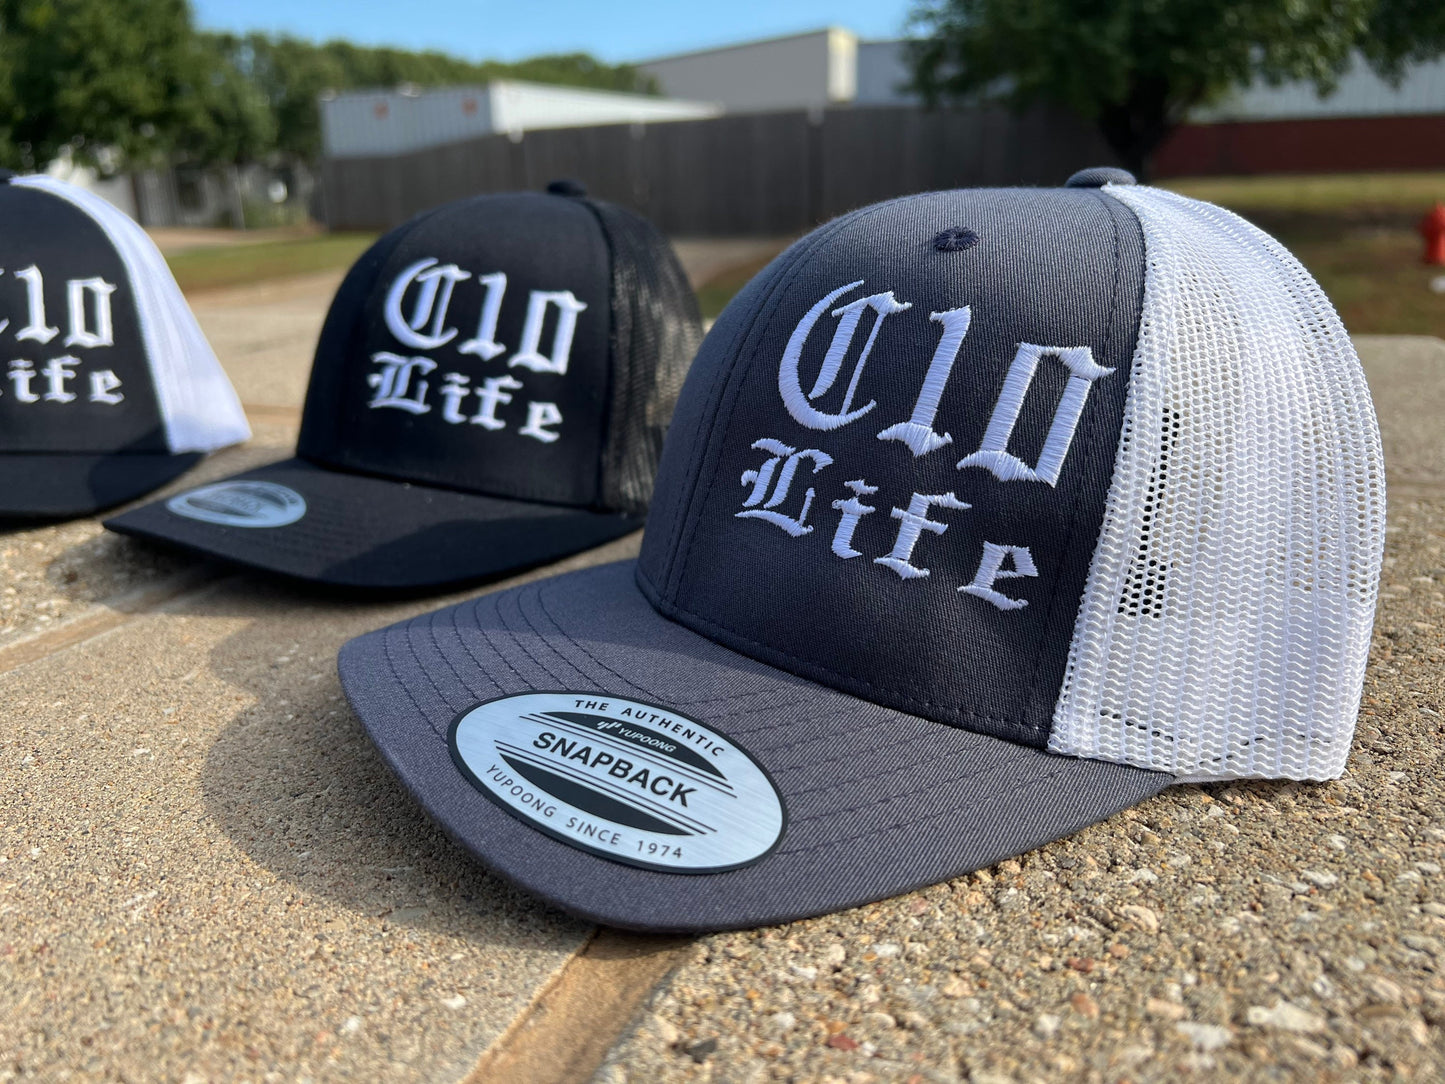 OG C10 Life Gangsta Trucker Snapback Hat - Old English Script - 3 Variations - Durable Mesh Back -  Perfect for Classic Truck Enthusiasts